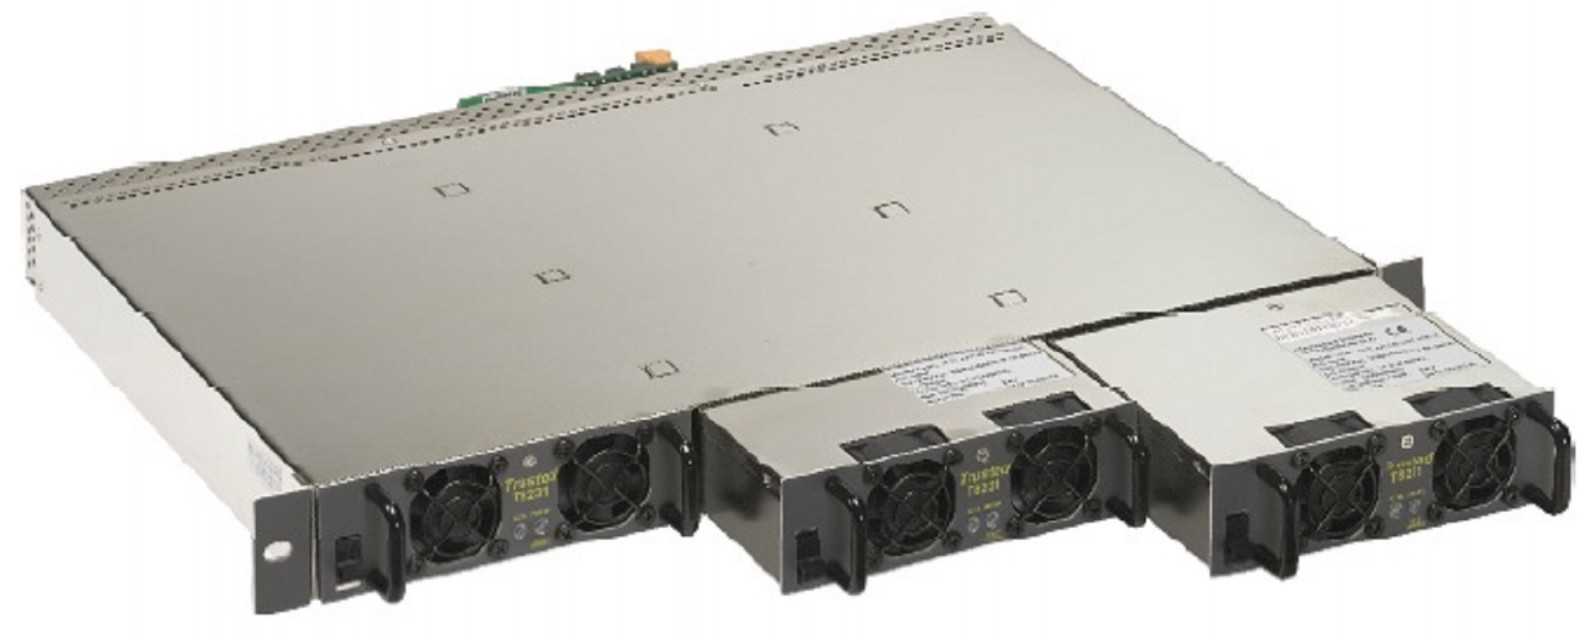 High-Performance T8240 Power Shelf: Reliable Power Solutions